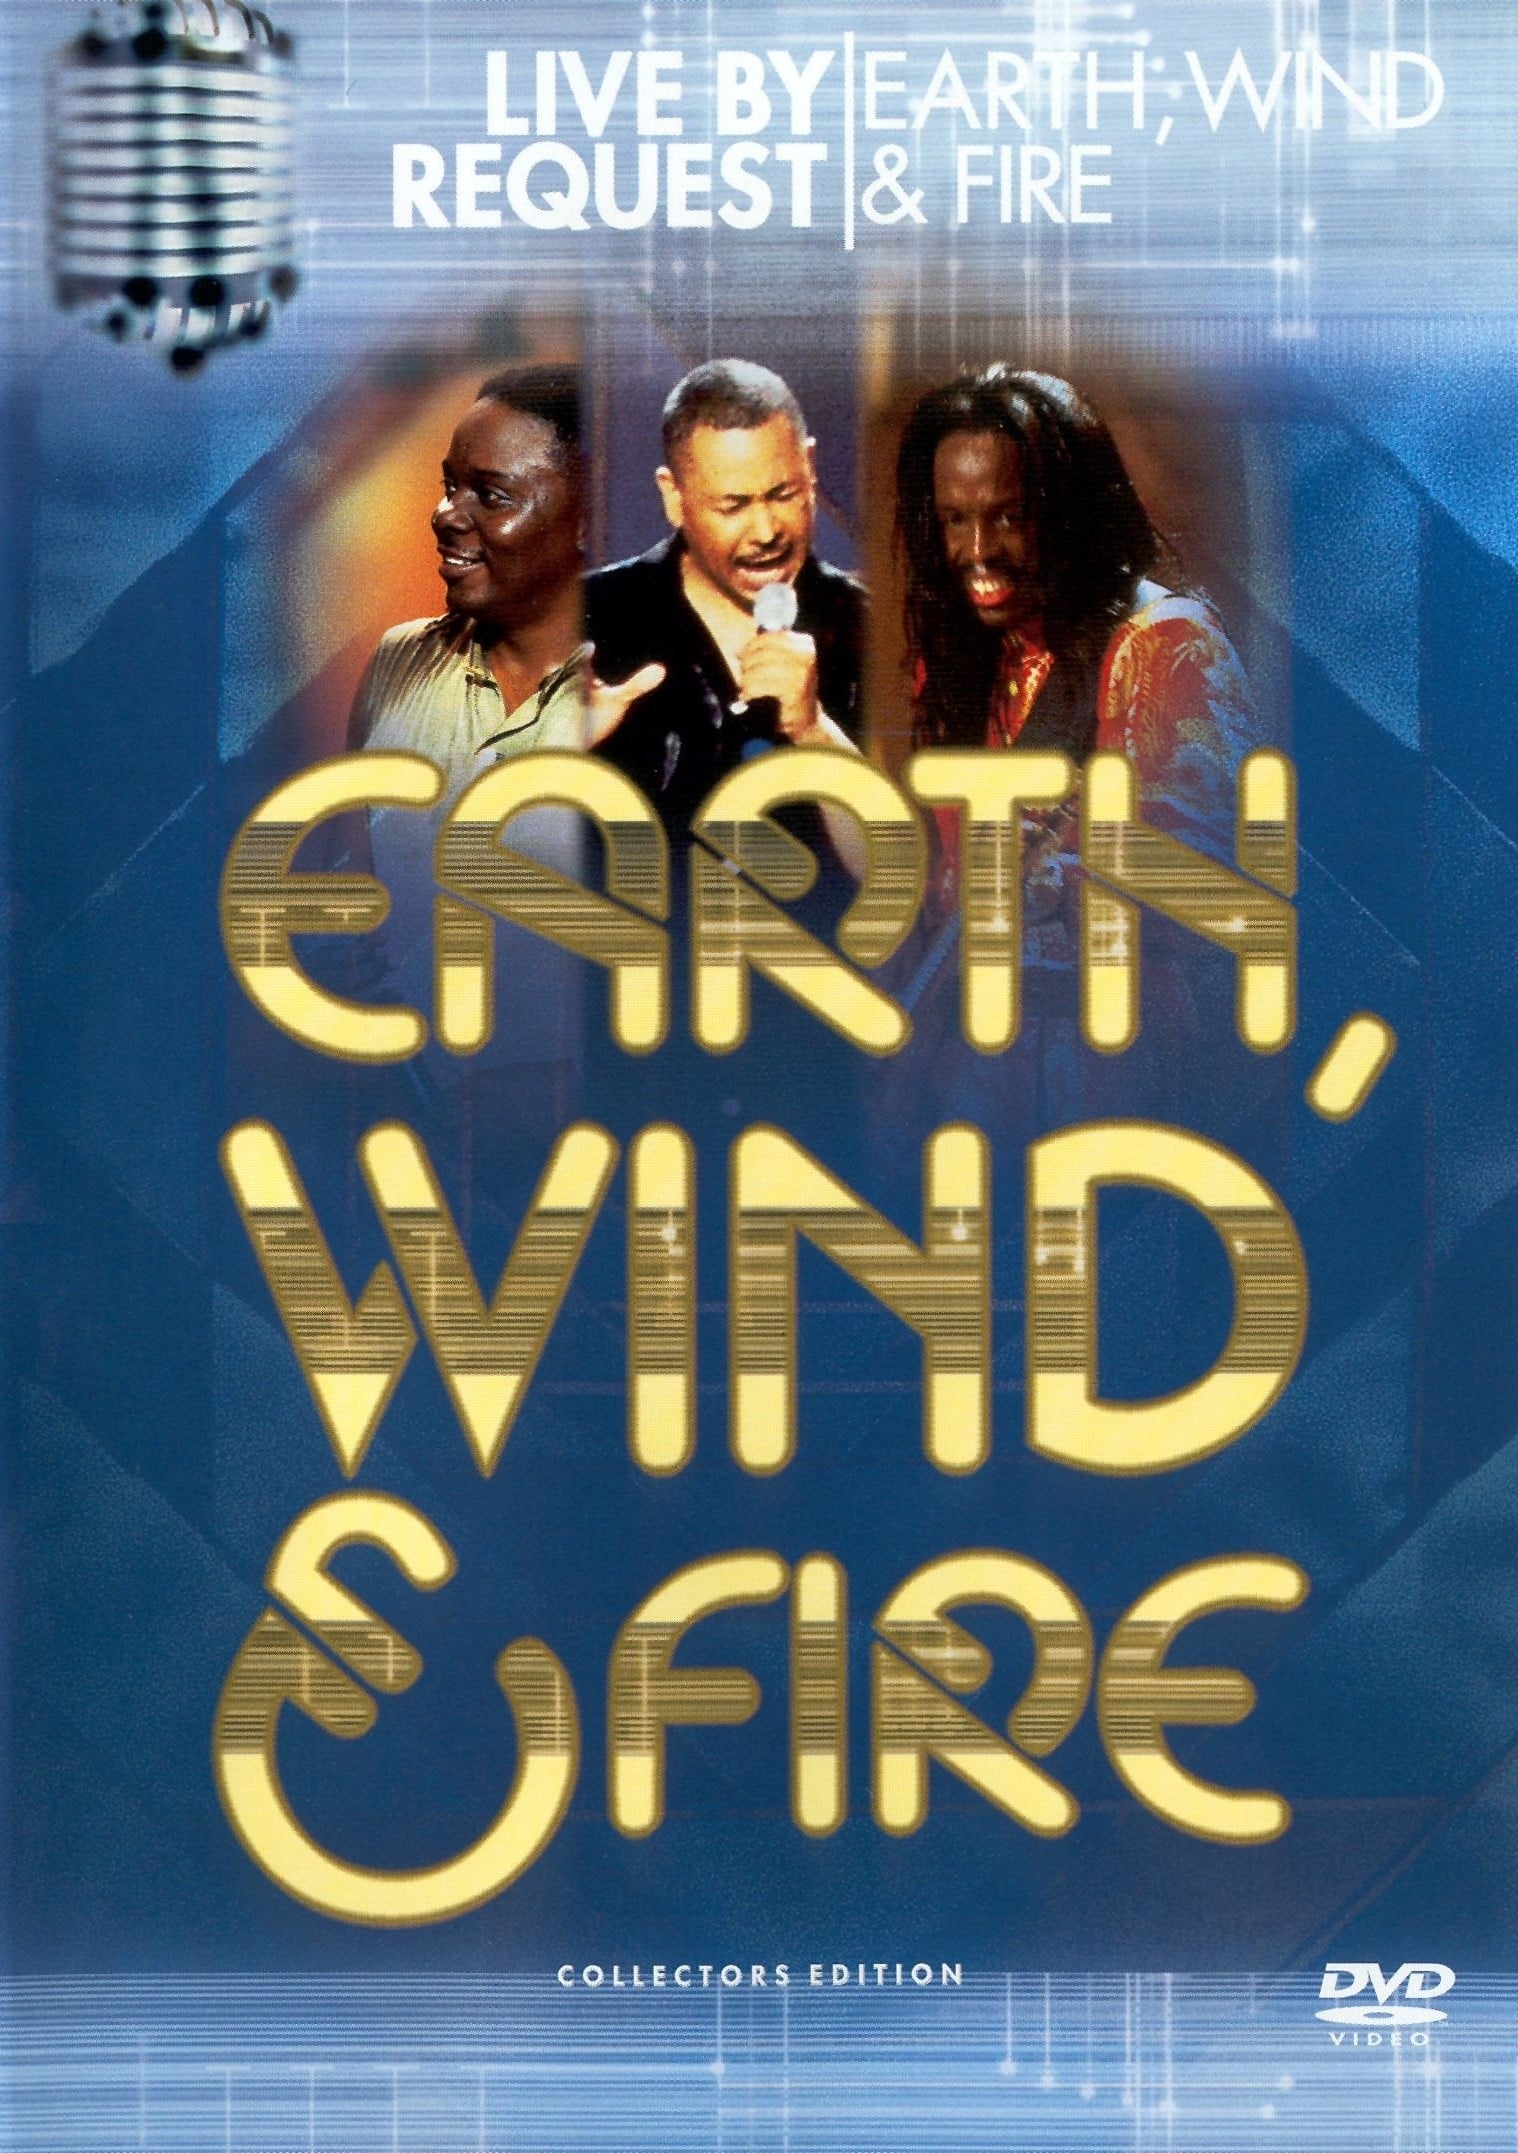 Earth, Wind & Fire: Live by Request